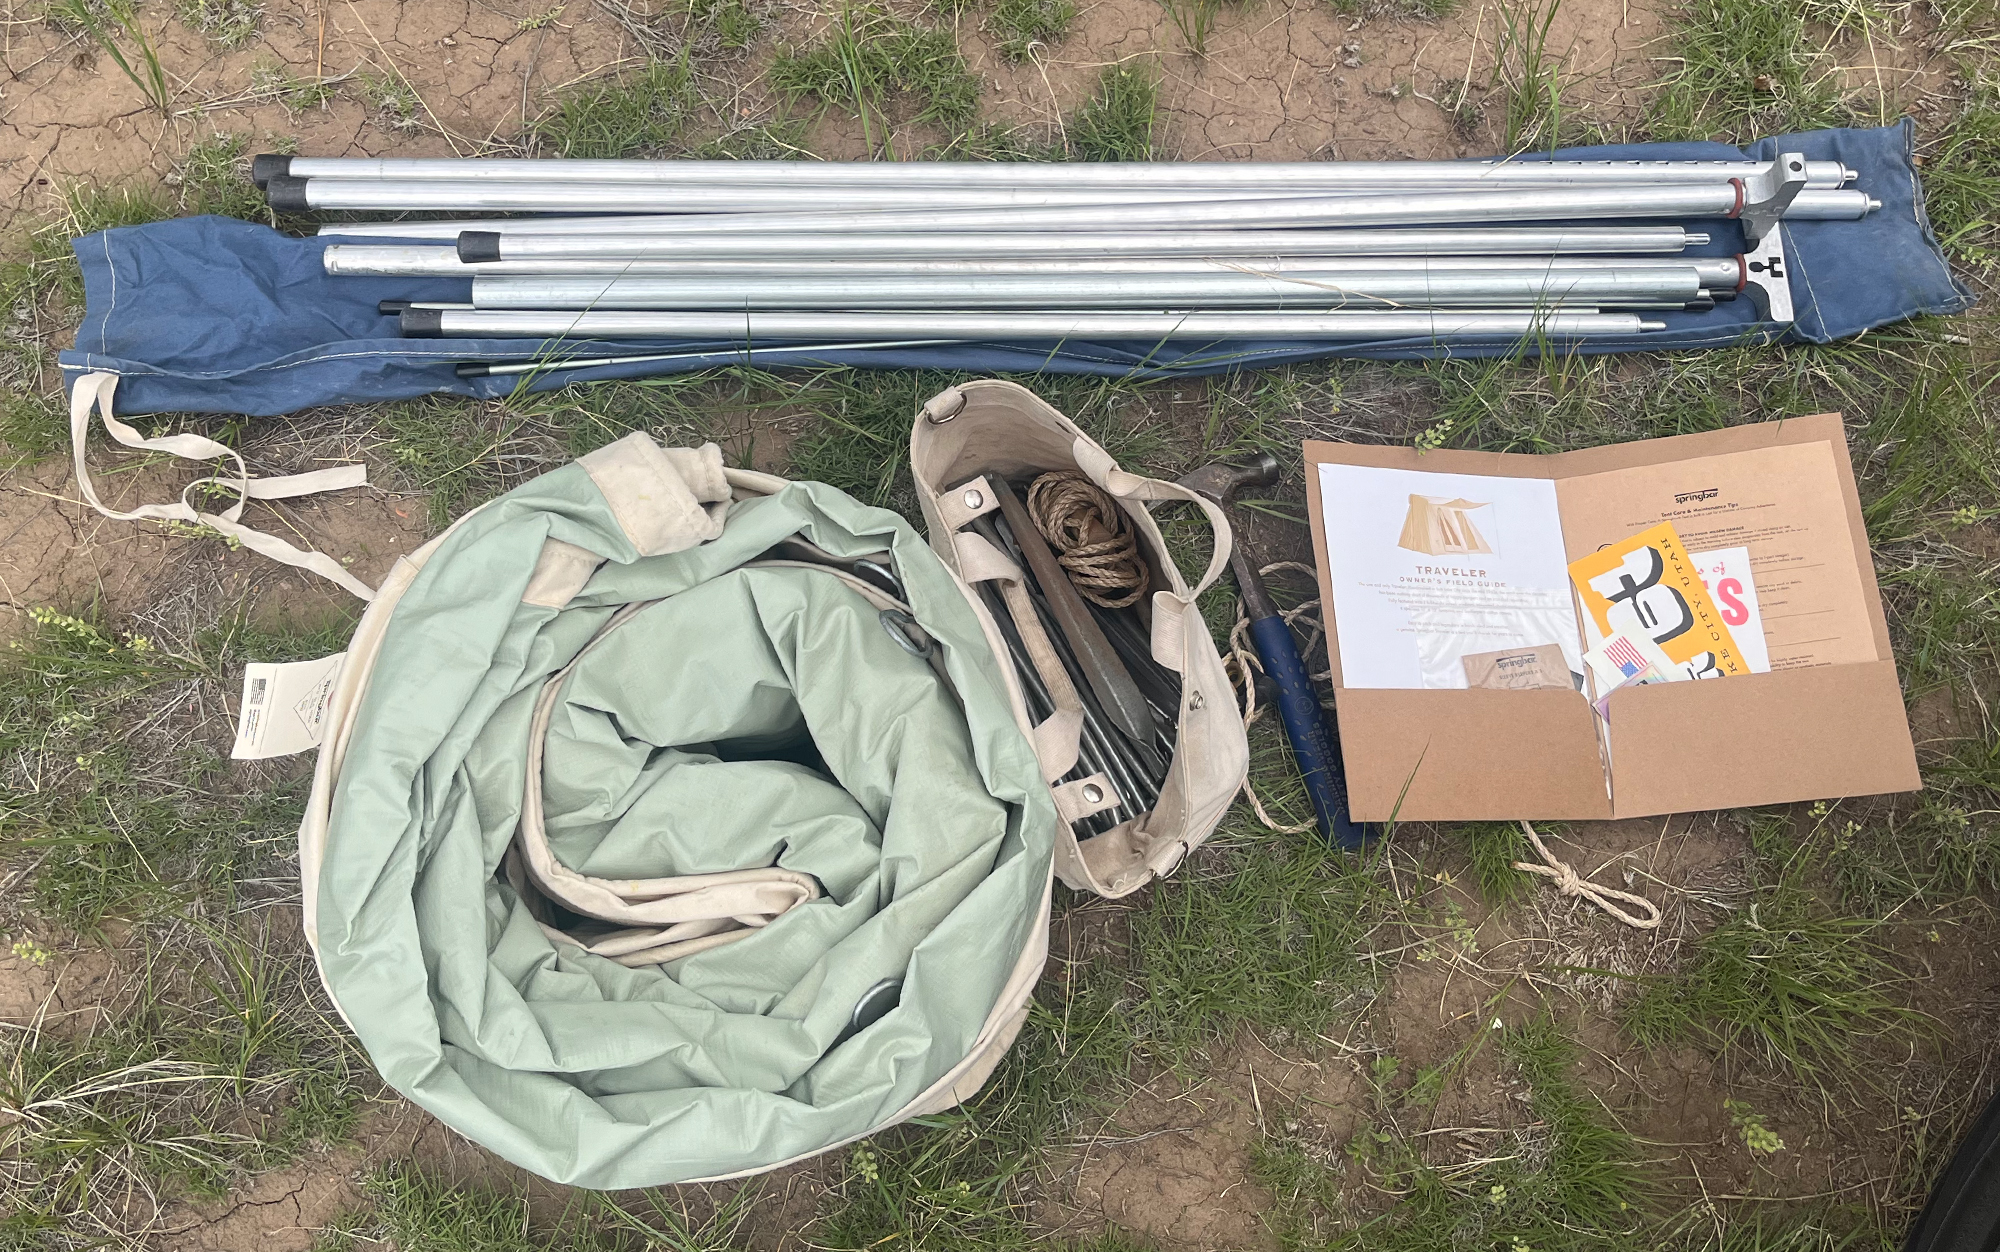 Pictured is the Traveler tent with storage bag, pole set with storage bag, tent stakes in the included canvas bag with awning ropes, the owner’s field guide, and a hammer.